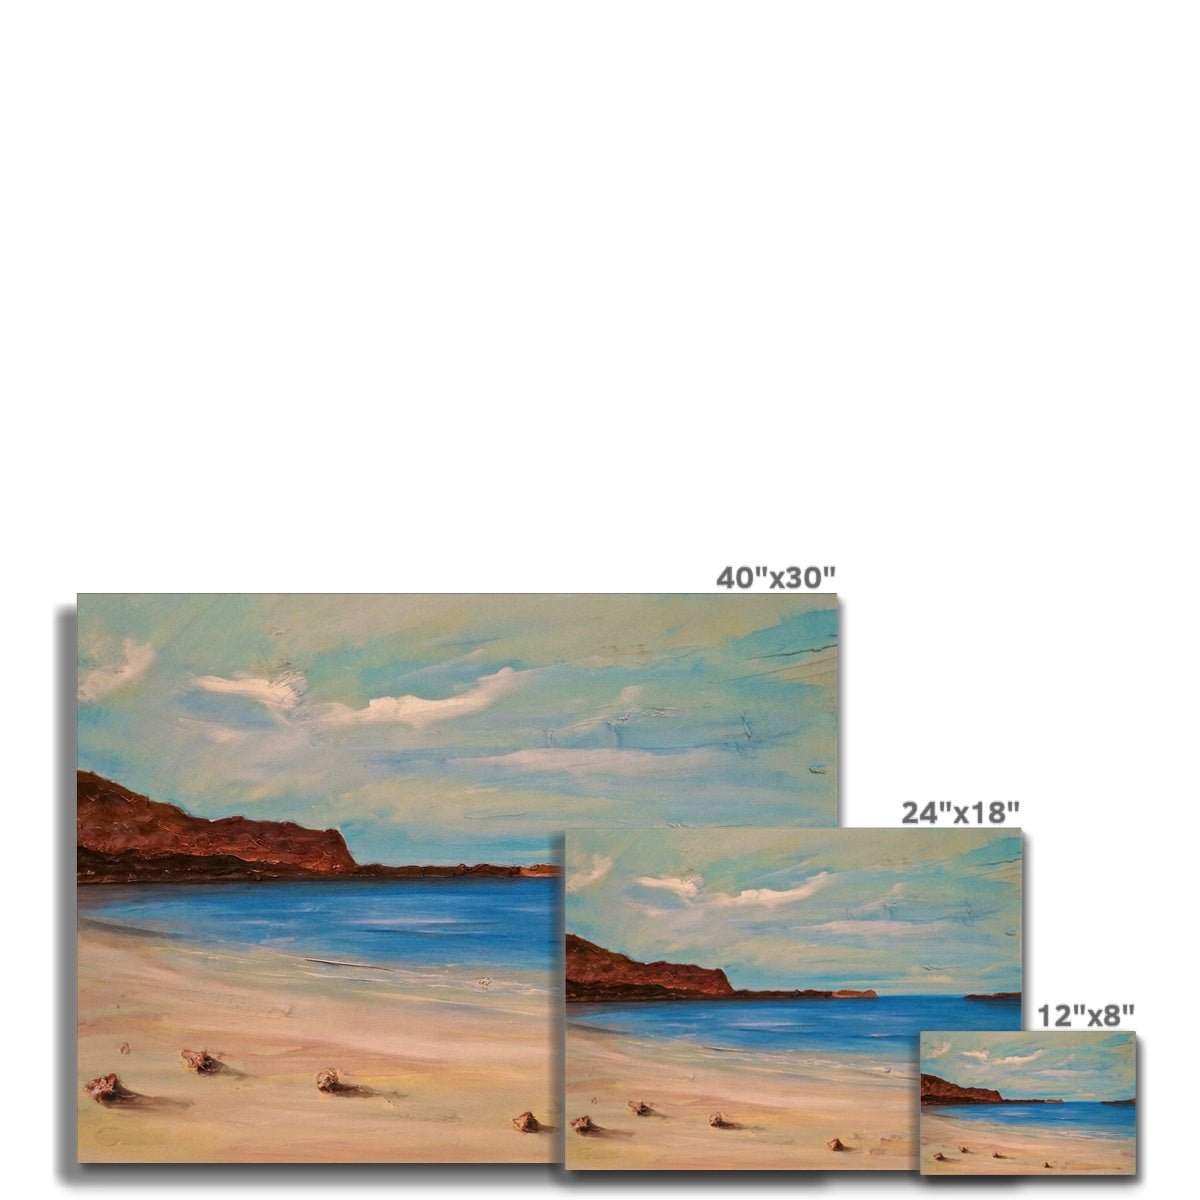 Bosta Beach Lewis Painting | Canvas From Scotland-Contemporary Stretched Canvas Prints-Hebridean Islands Art Gallery-Paintings, Prints, Homeware, Art Gifts From Scotland By Scottish Artist Kevin Hunter